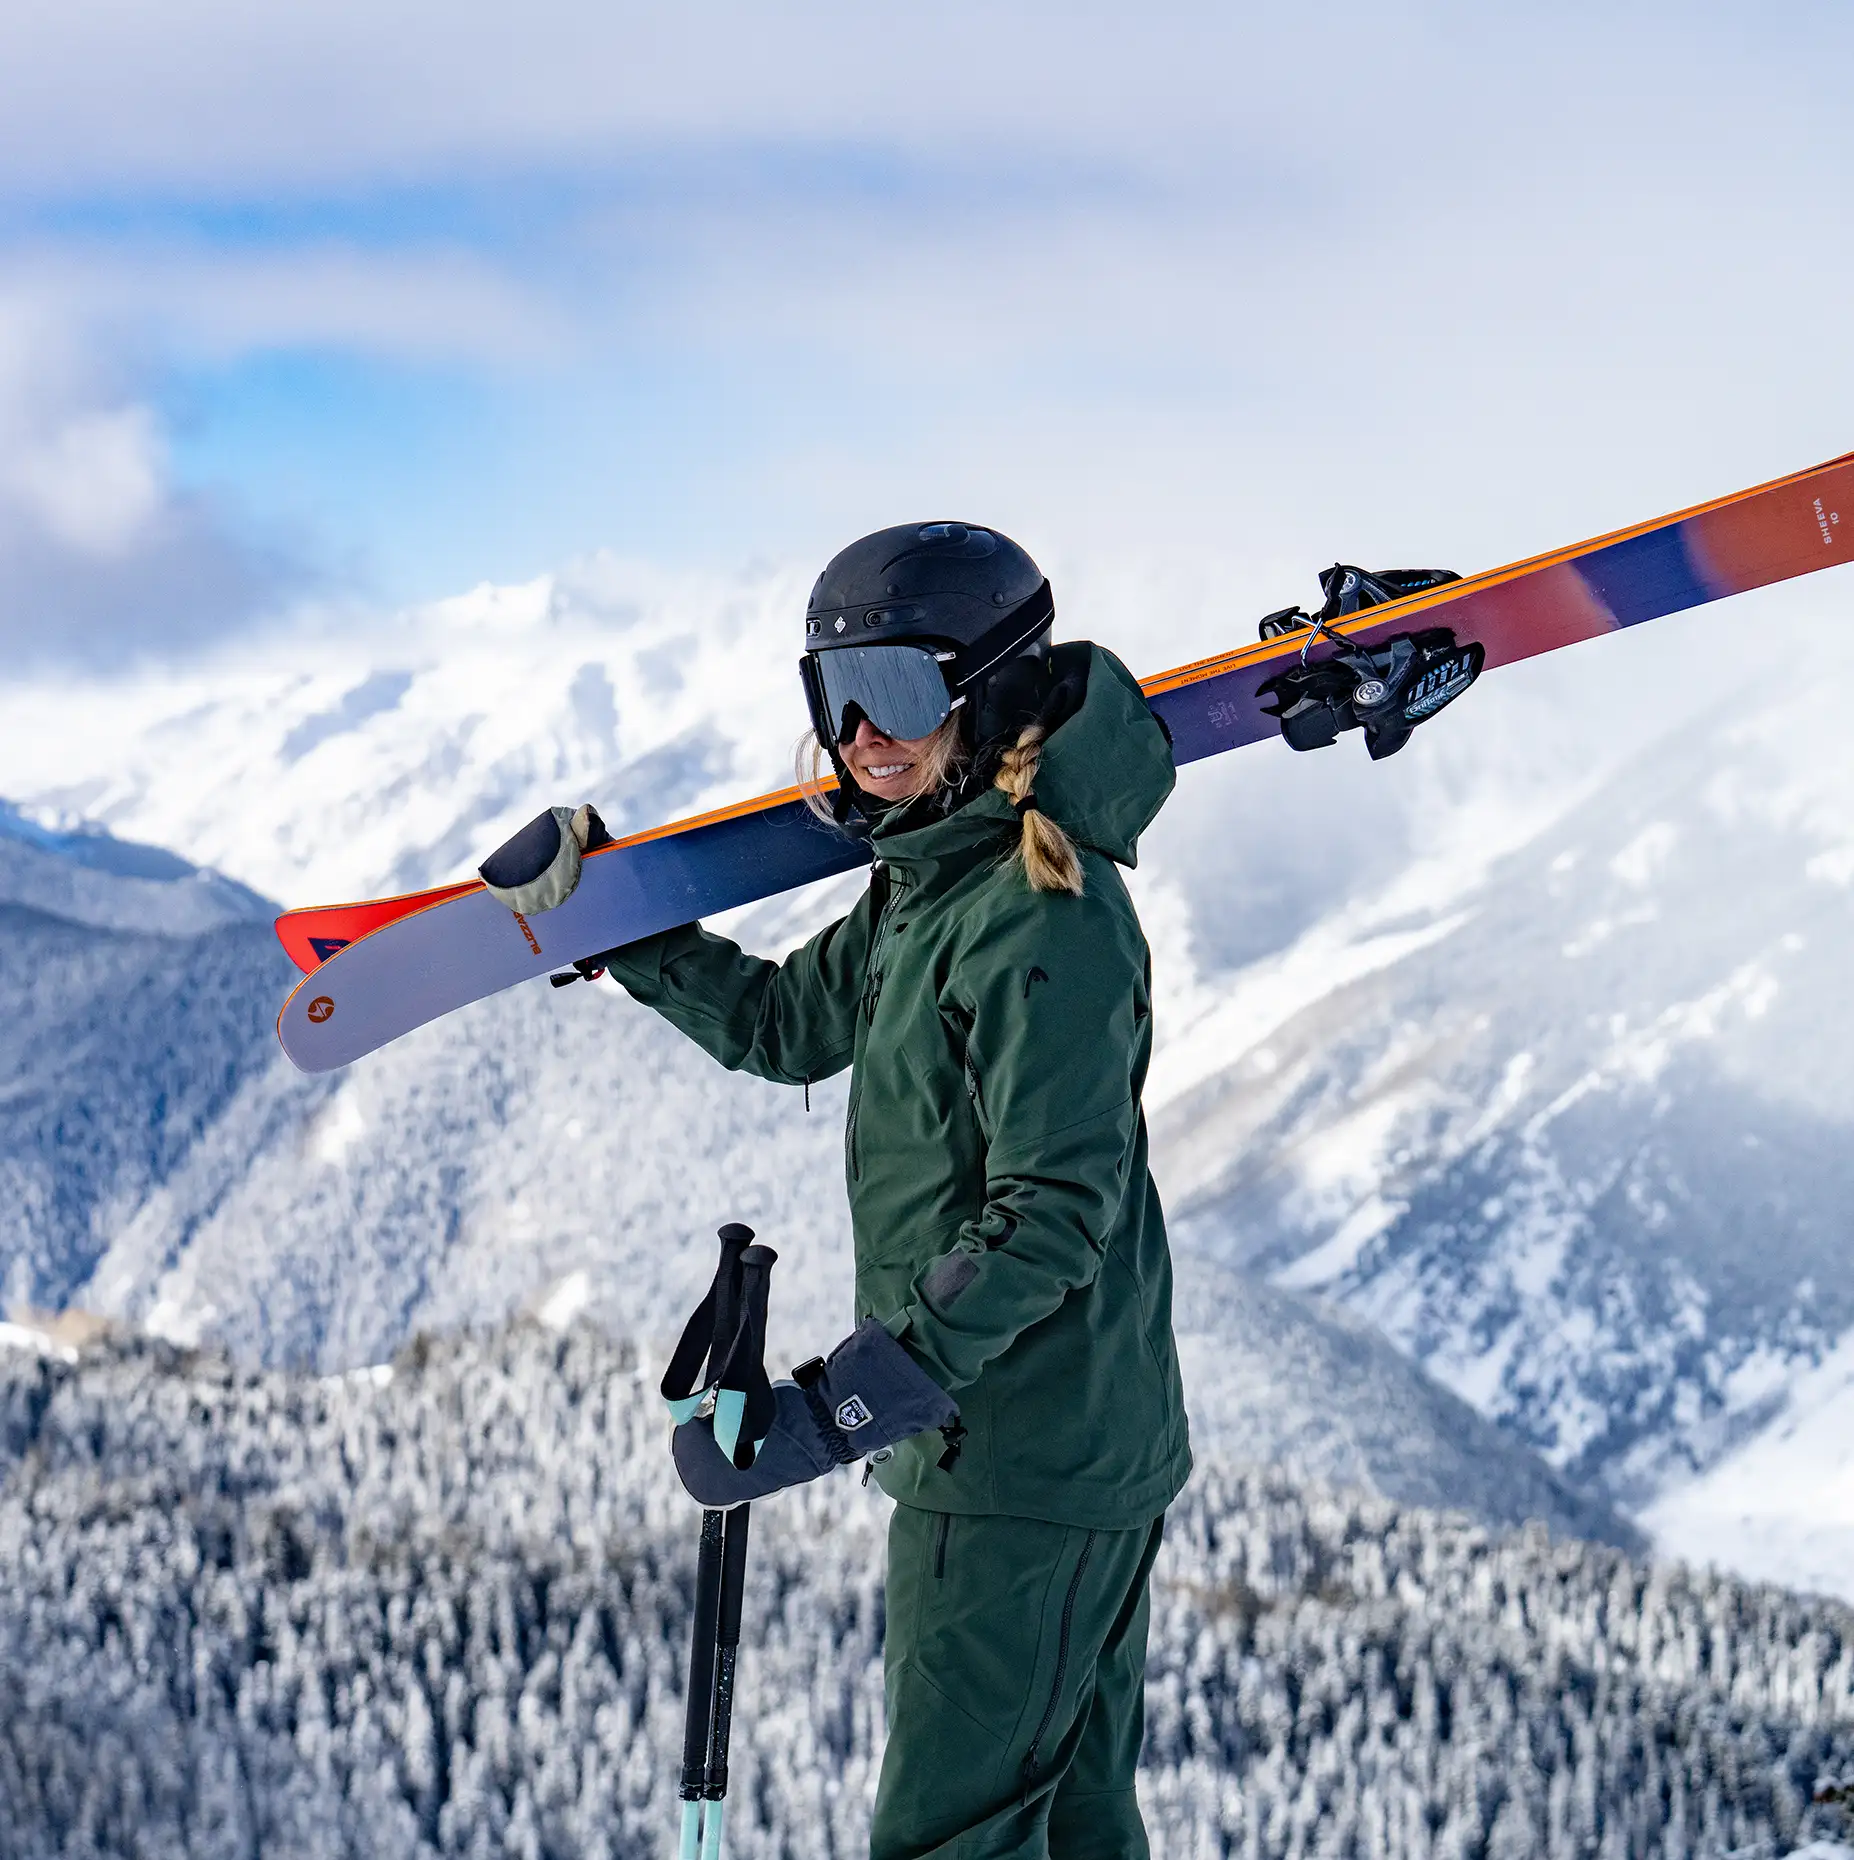 The best ski resort gear and apparel for your next trip to the